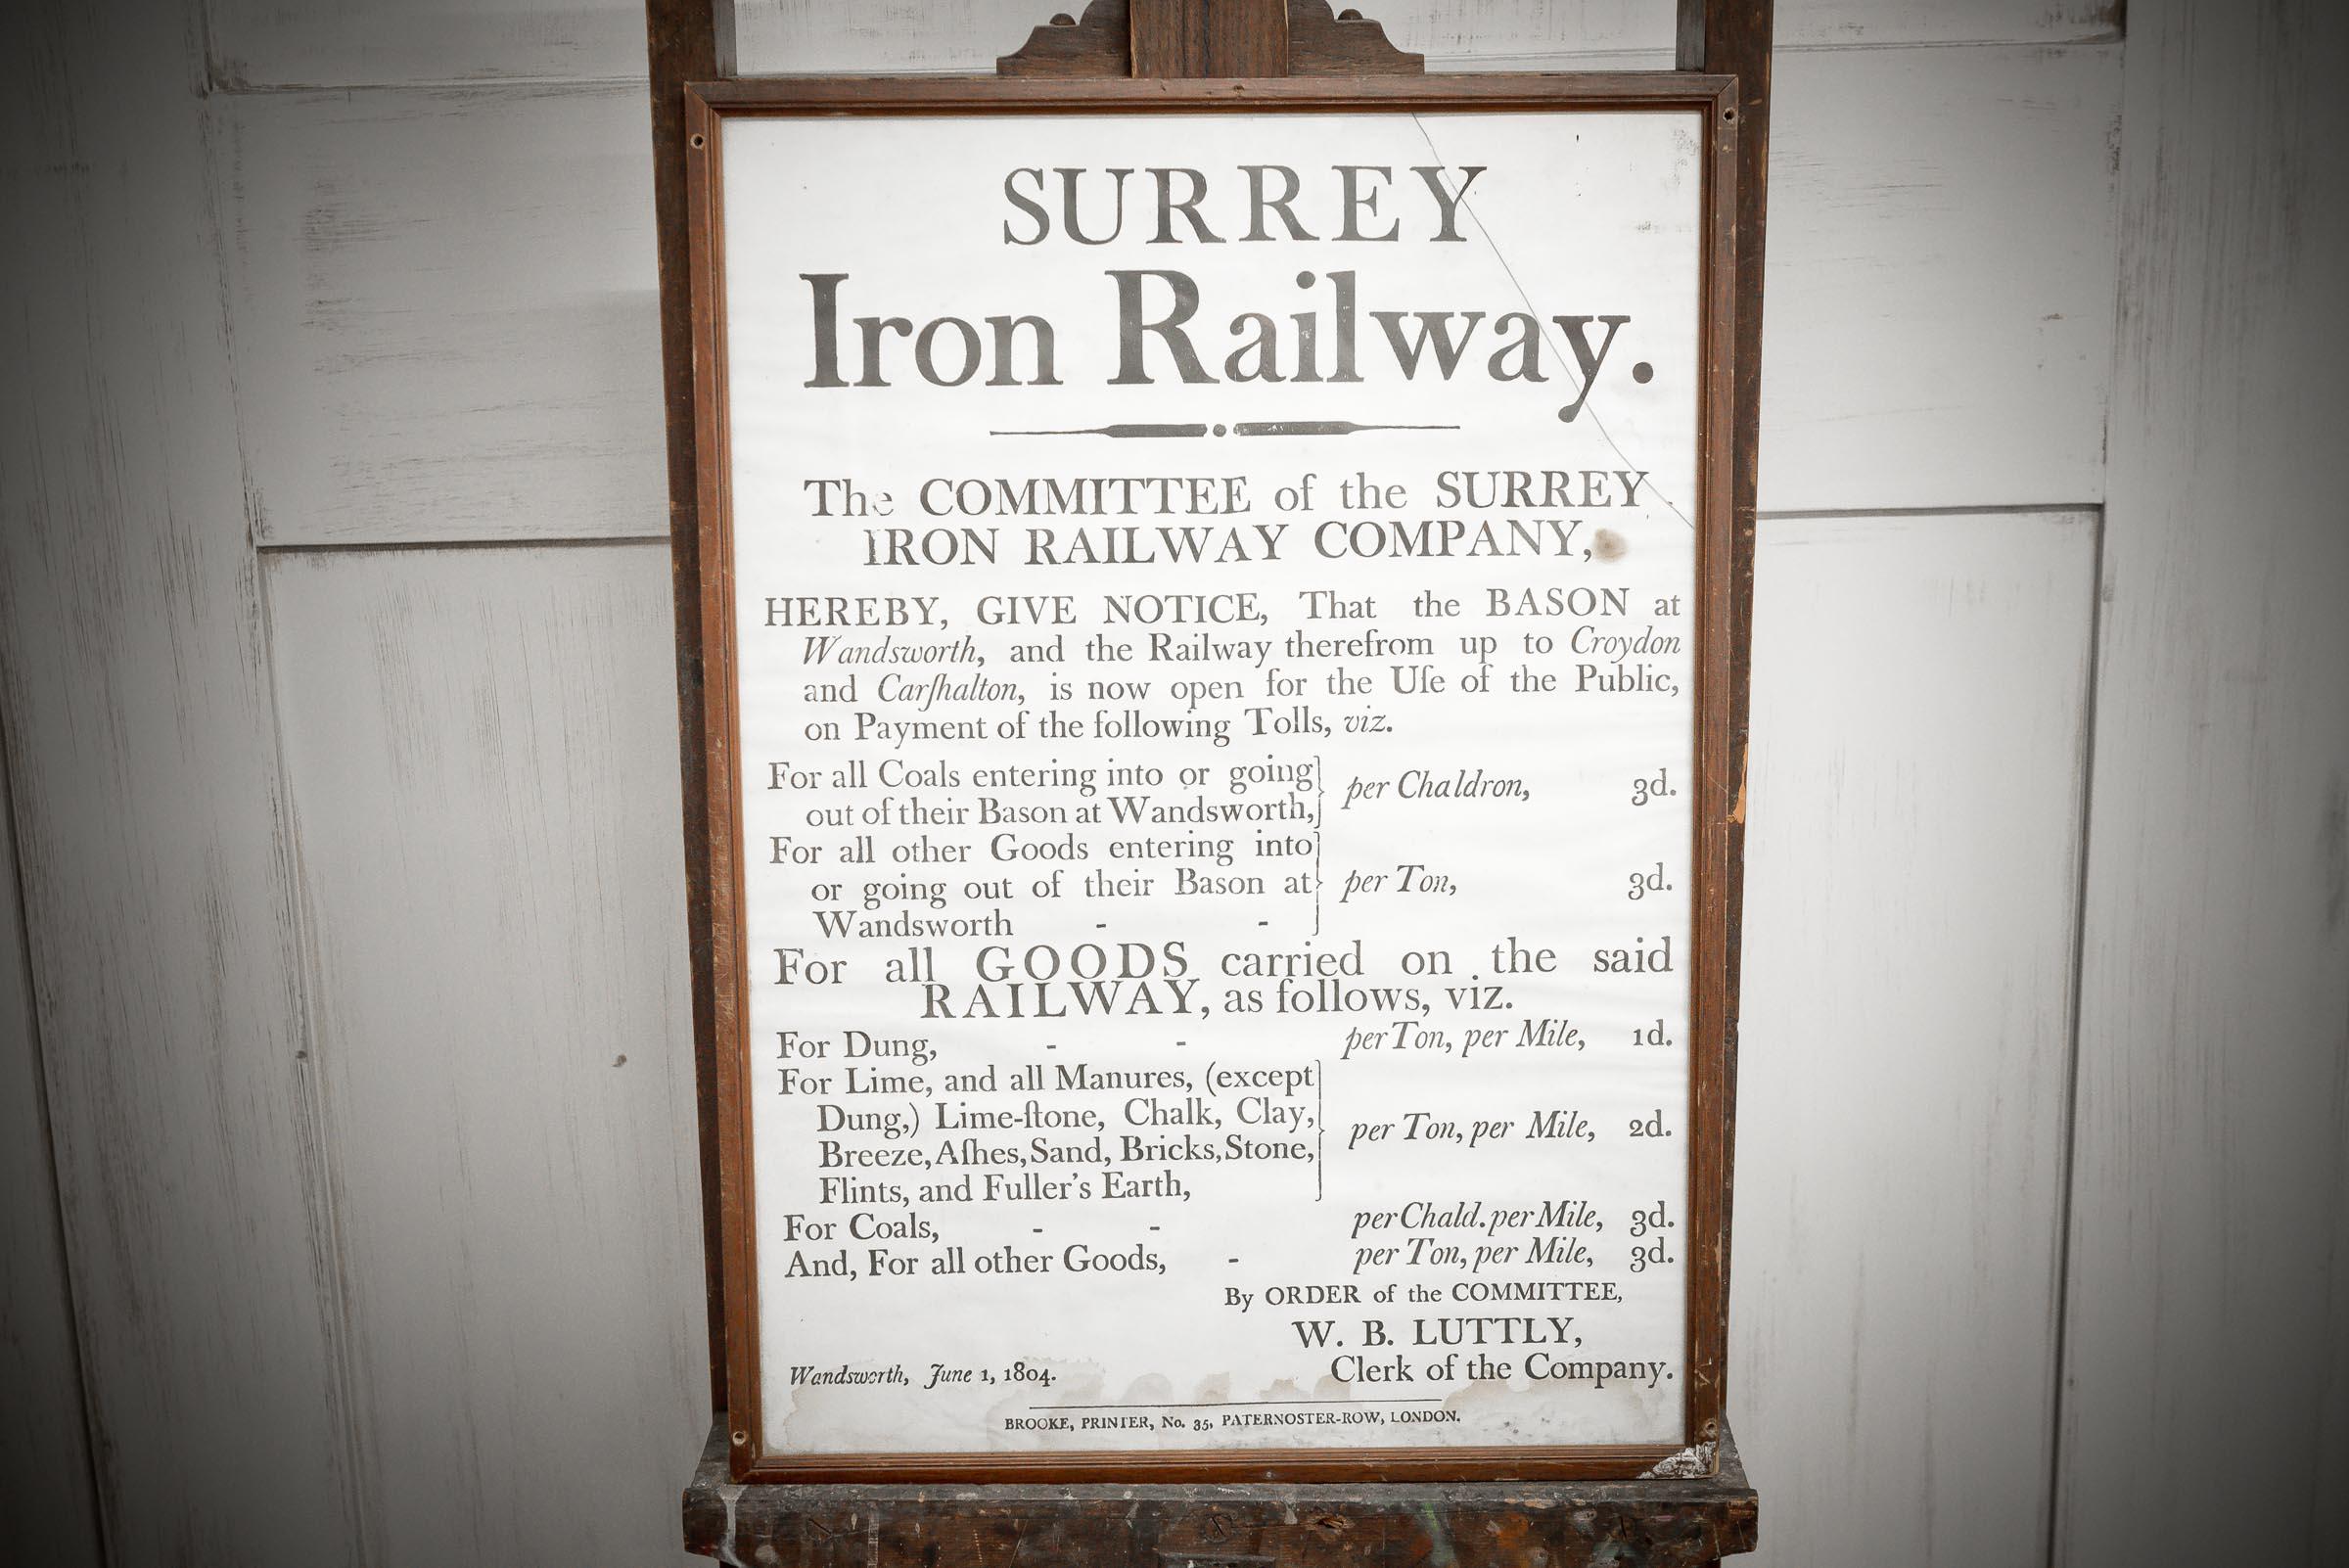 Surrey rail poster dating from 1804 establishing that a line is open for travel between wandsworth and croydon. Original poster encased in a wooden frame. Please ask for specific sizing. 